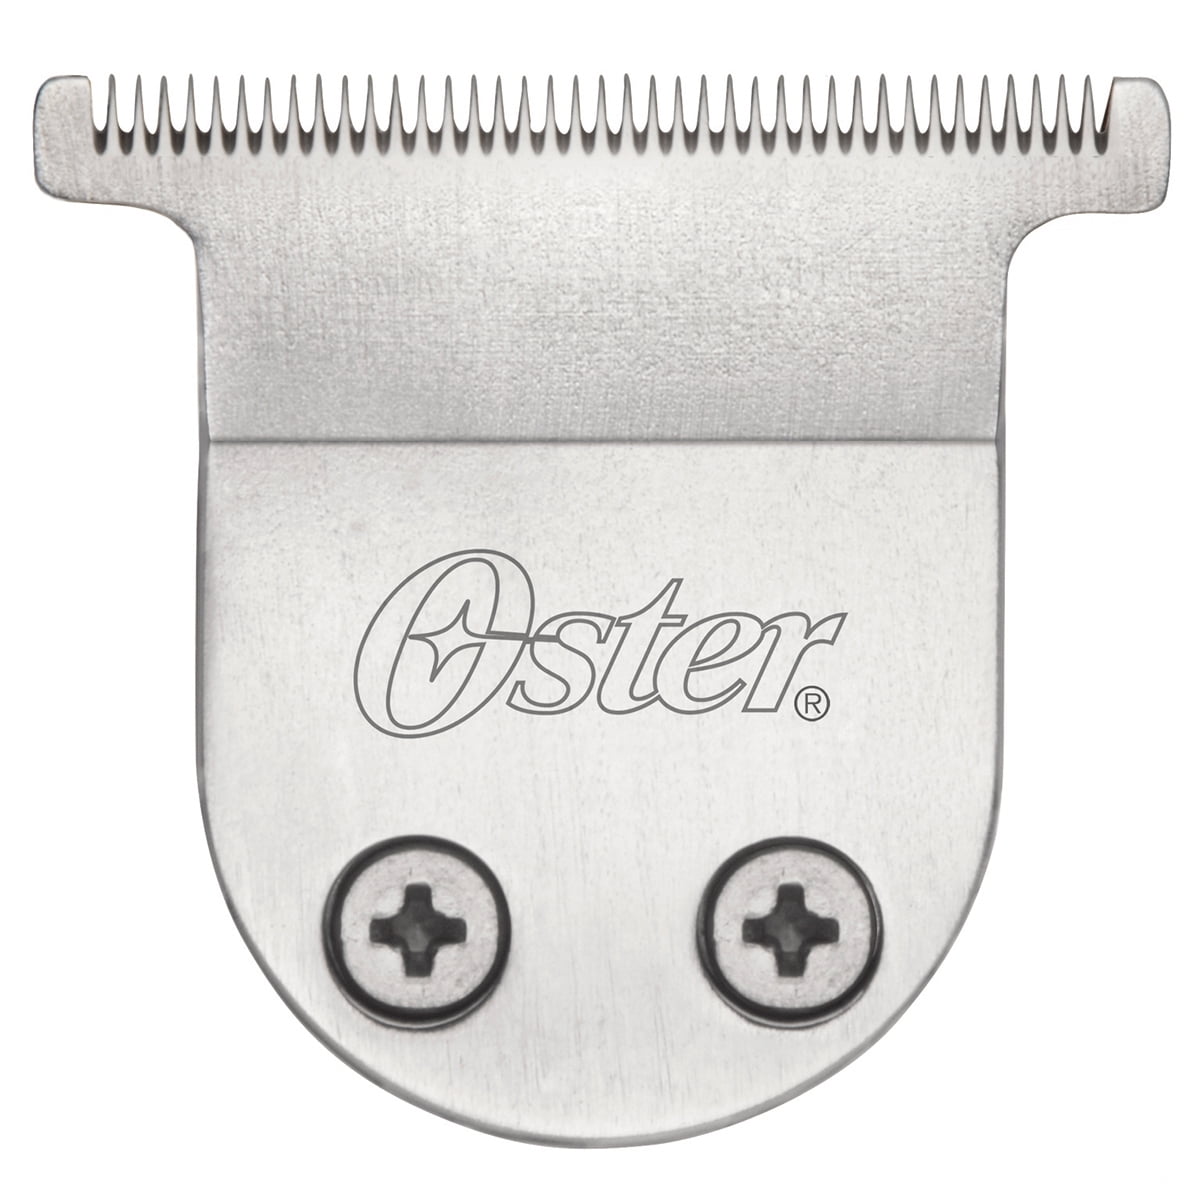 oster t blade replacement